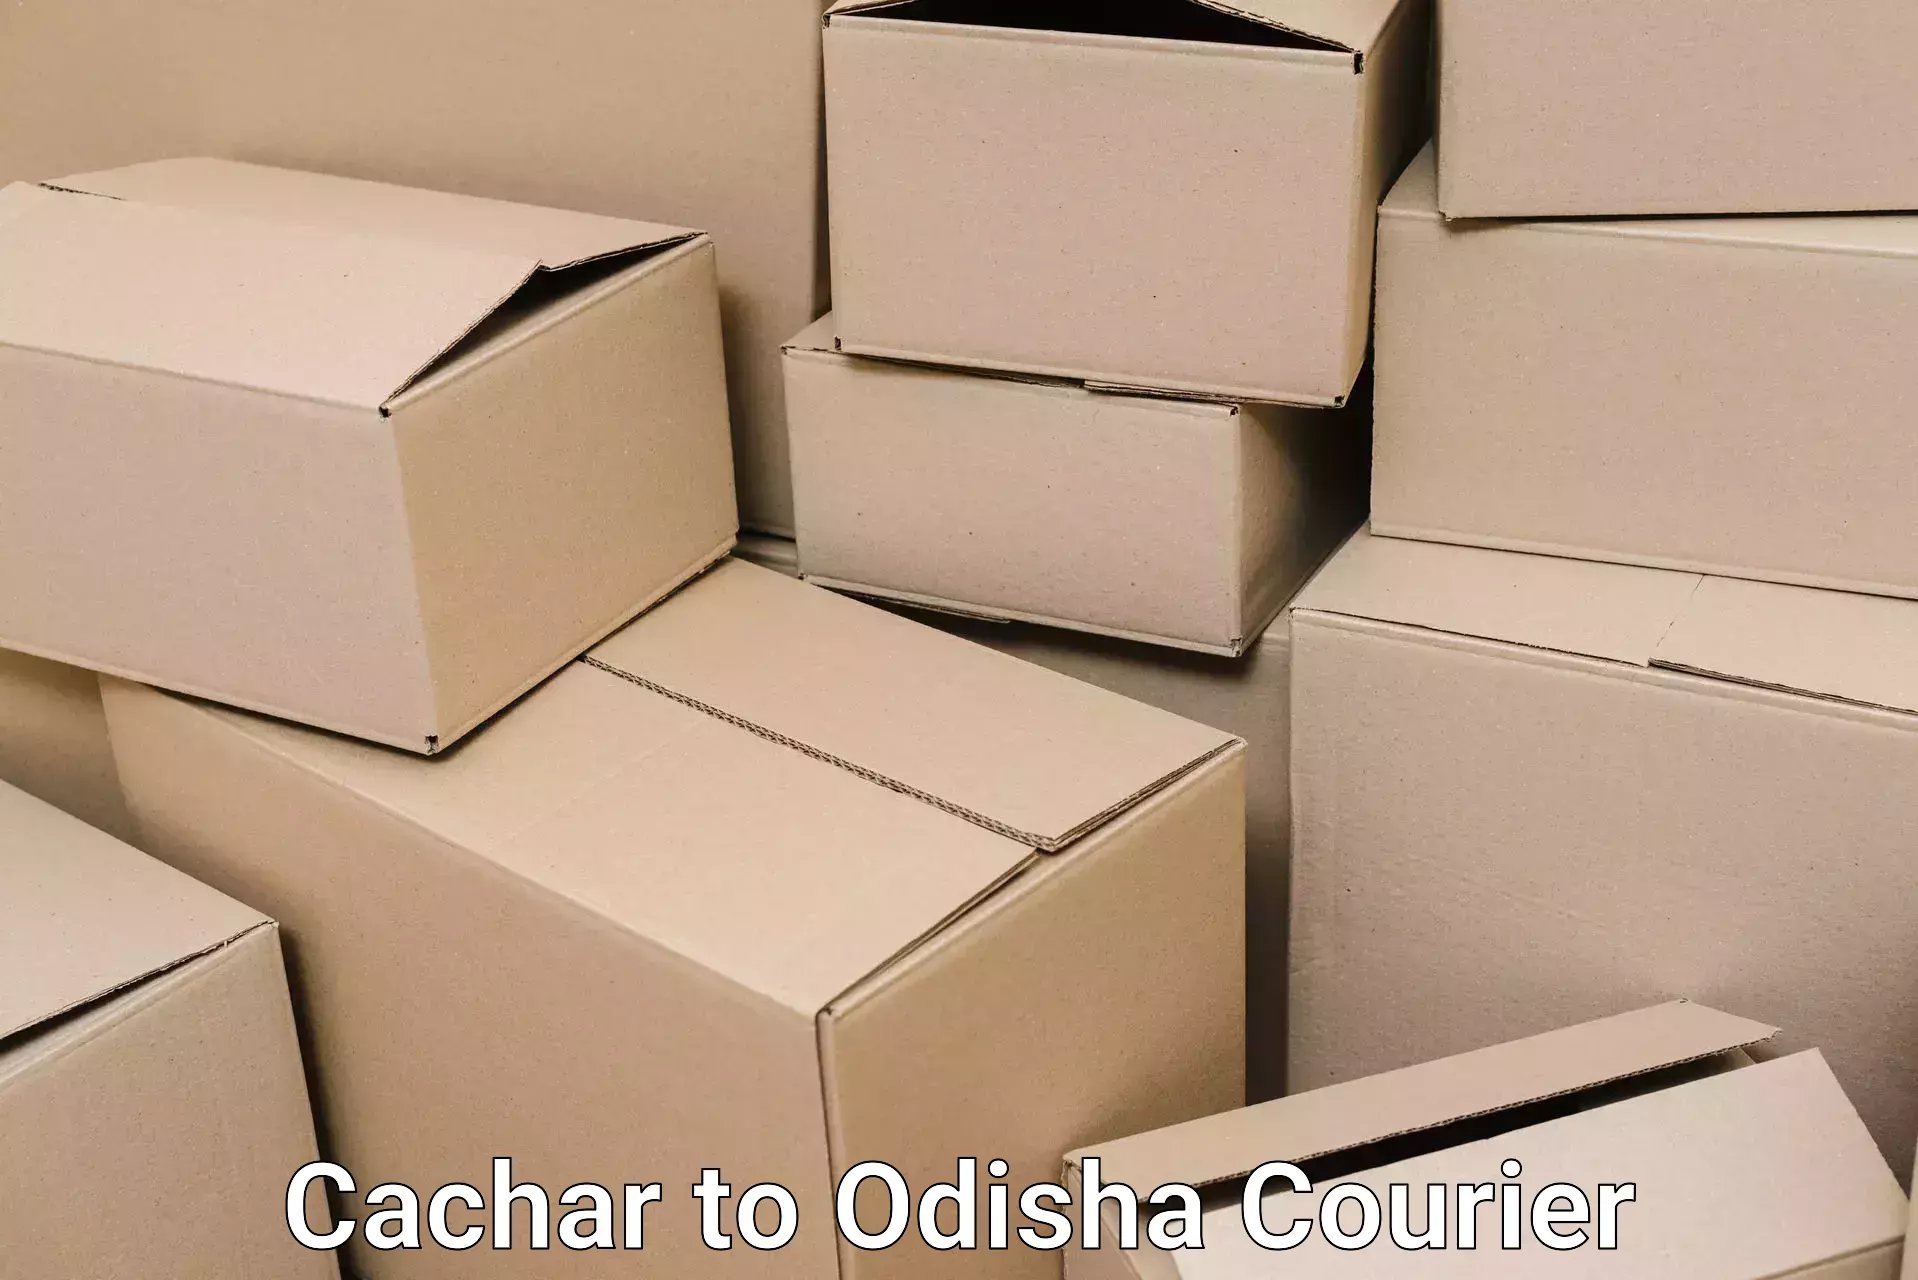 Efficient packing services Cachar to Udala